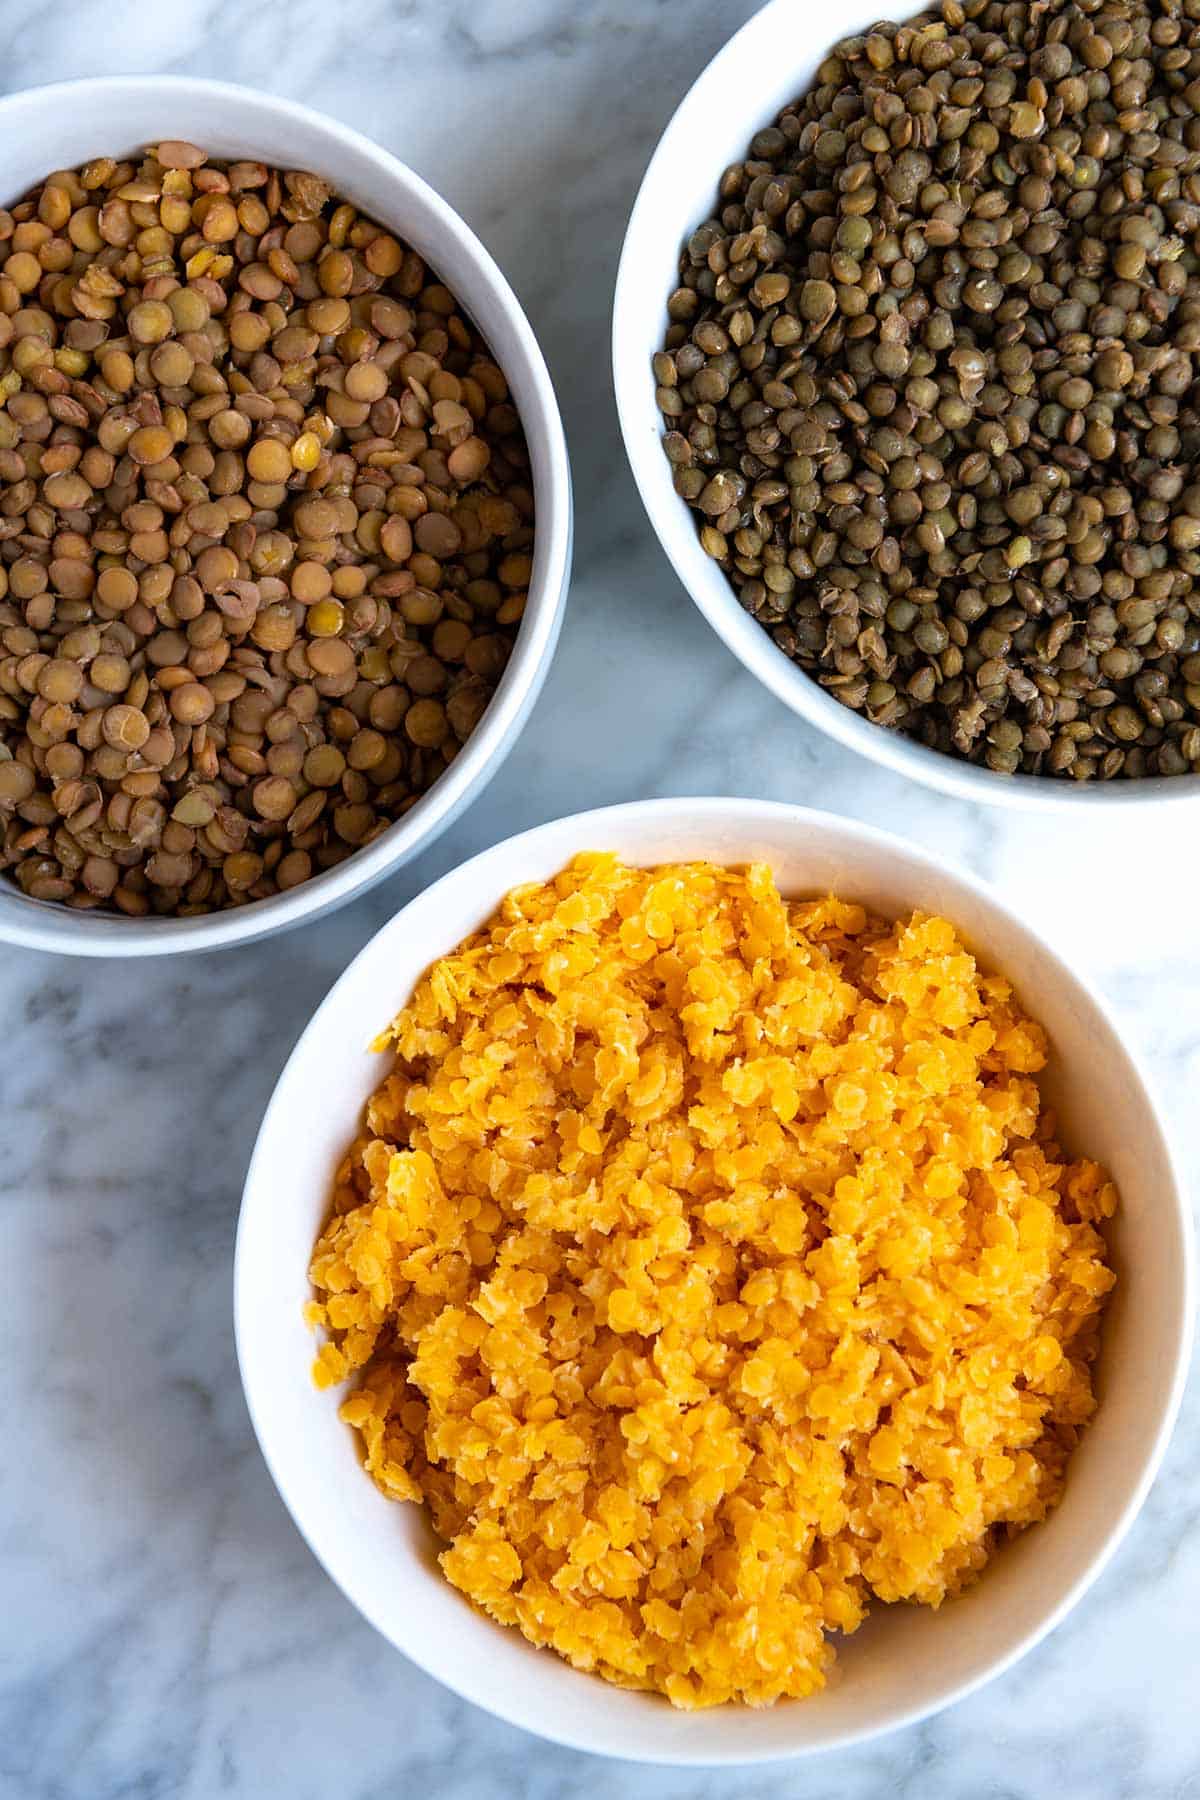 Red Lentils, Brown Lentils and French Lentils